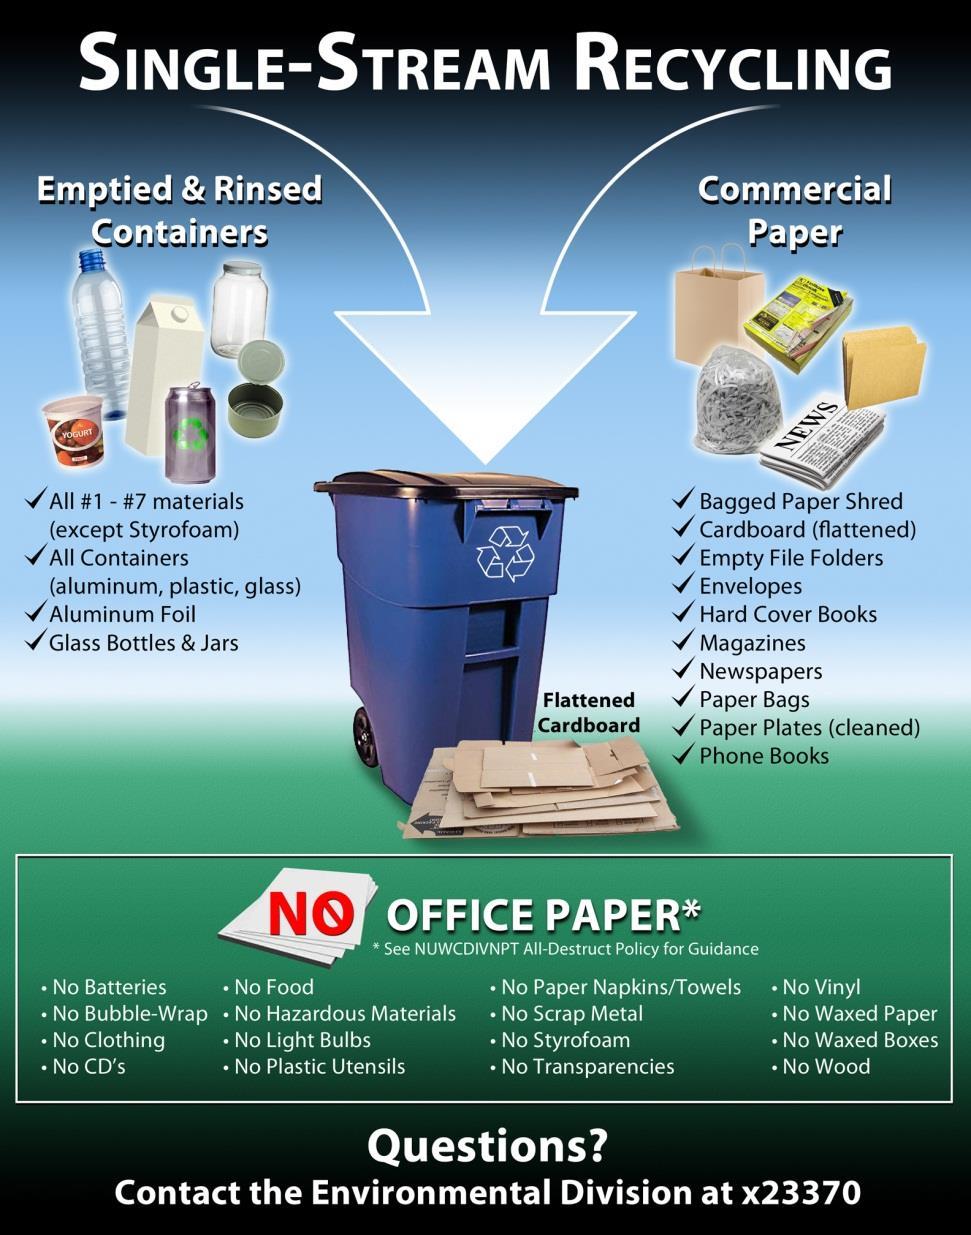 Single-Stream Recycling allows for most recyclable items to be collected in one central bin*.